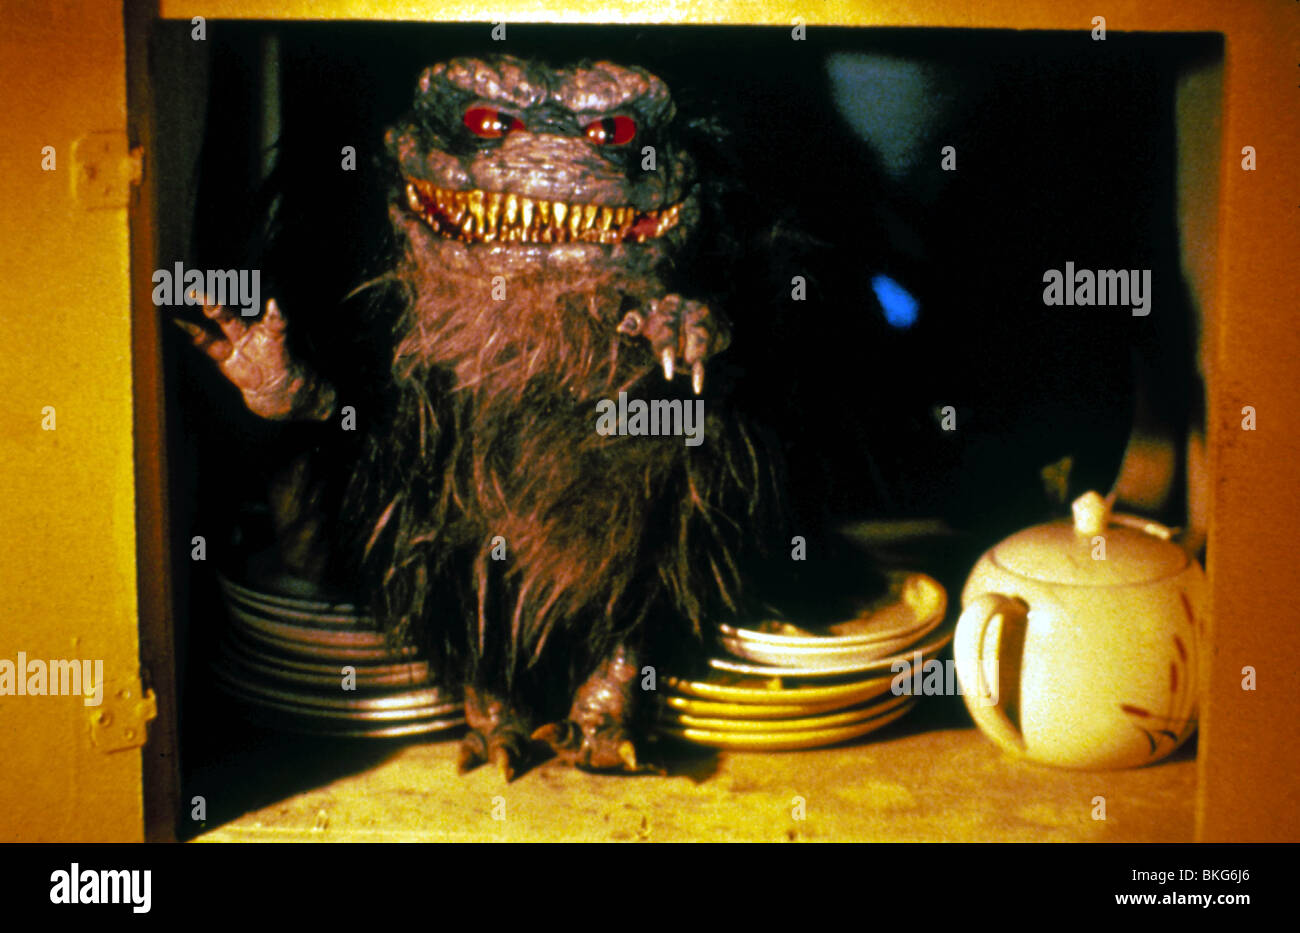 CRITTERS 3 -1992 Stock Photo